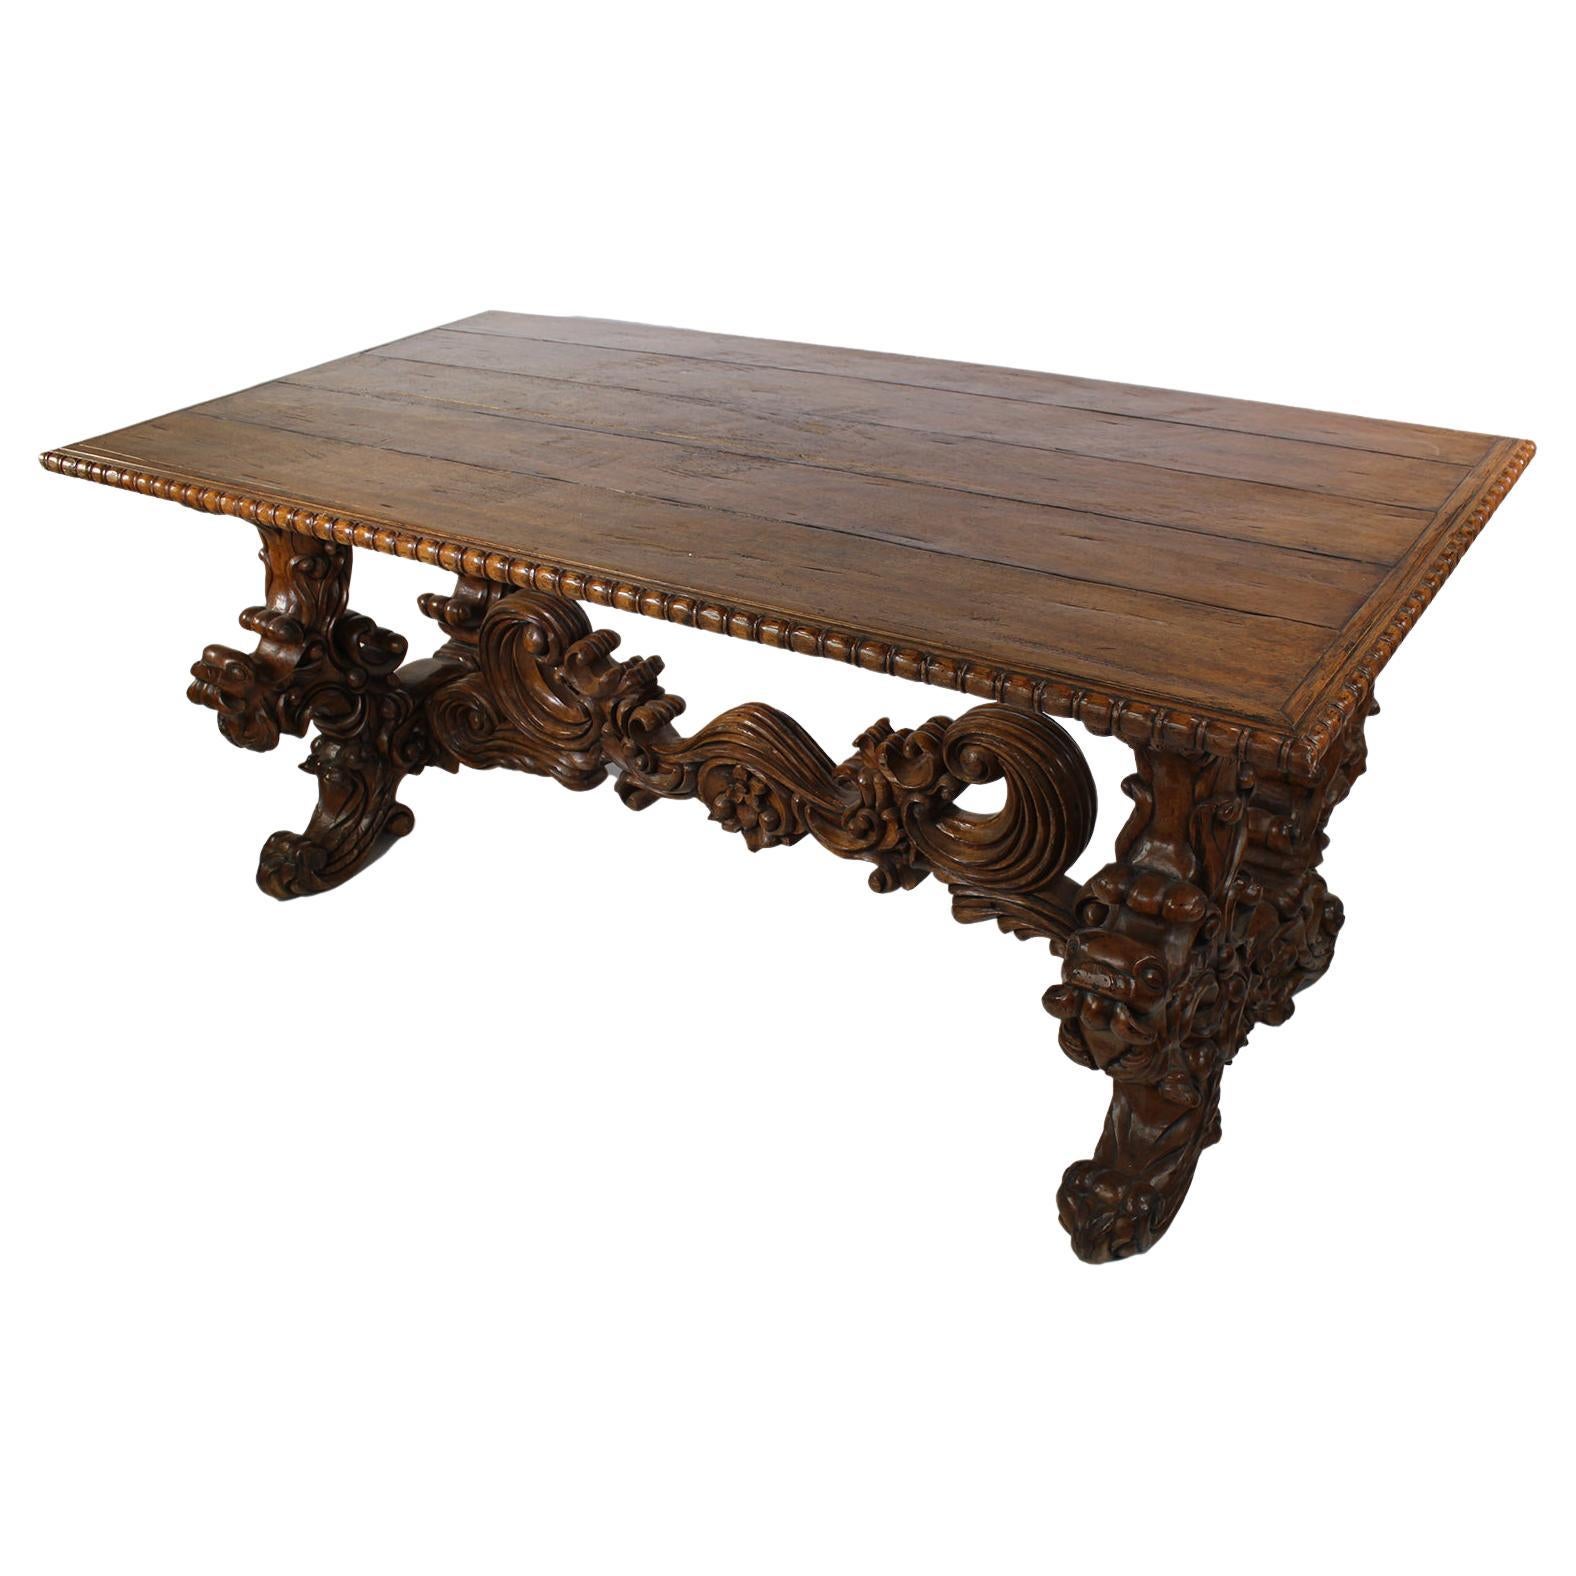 Baroque Revival Style Carved Wood Tavern or Farm Dining Pedestal Table For Sale